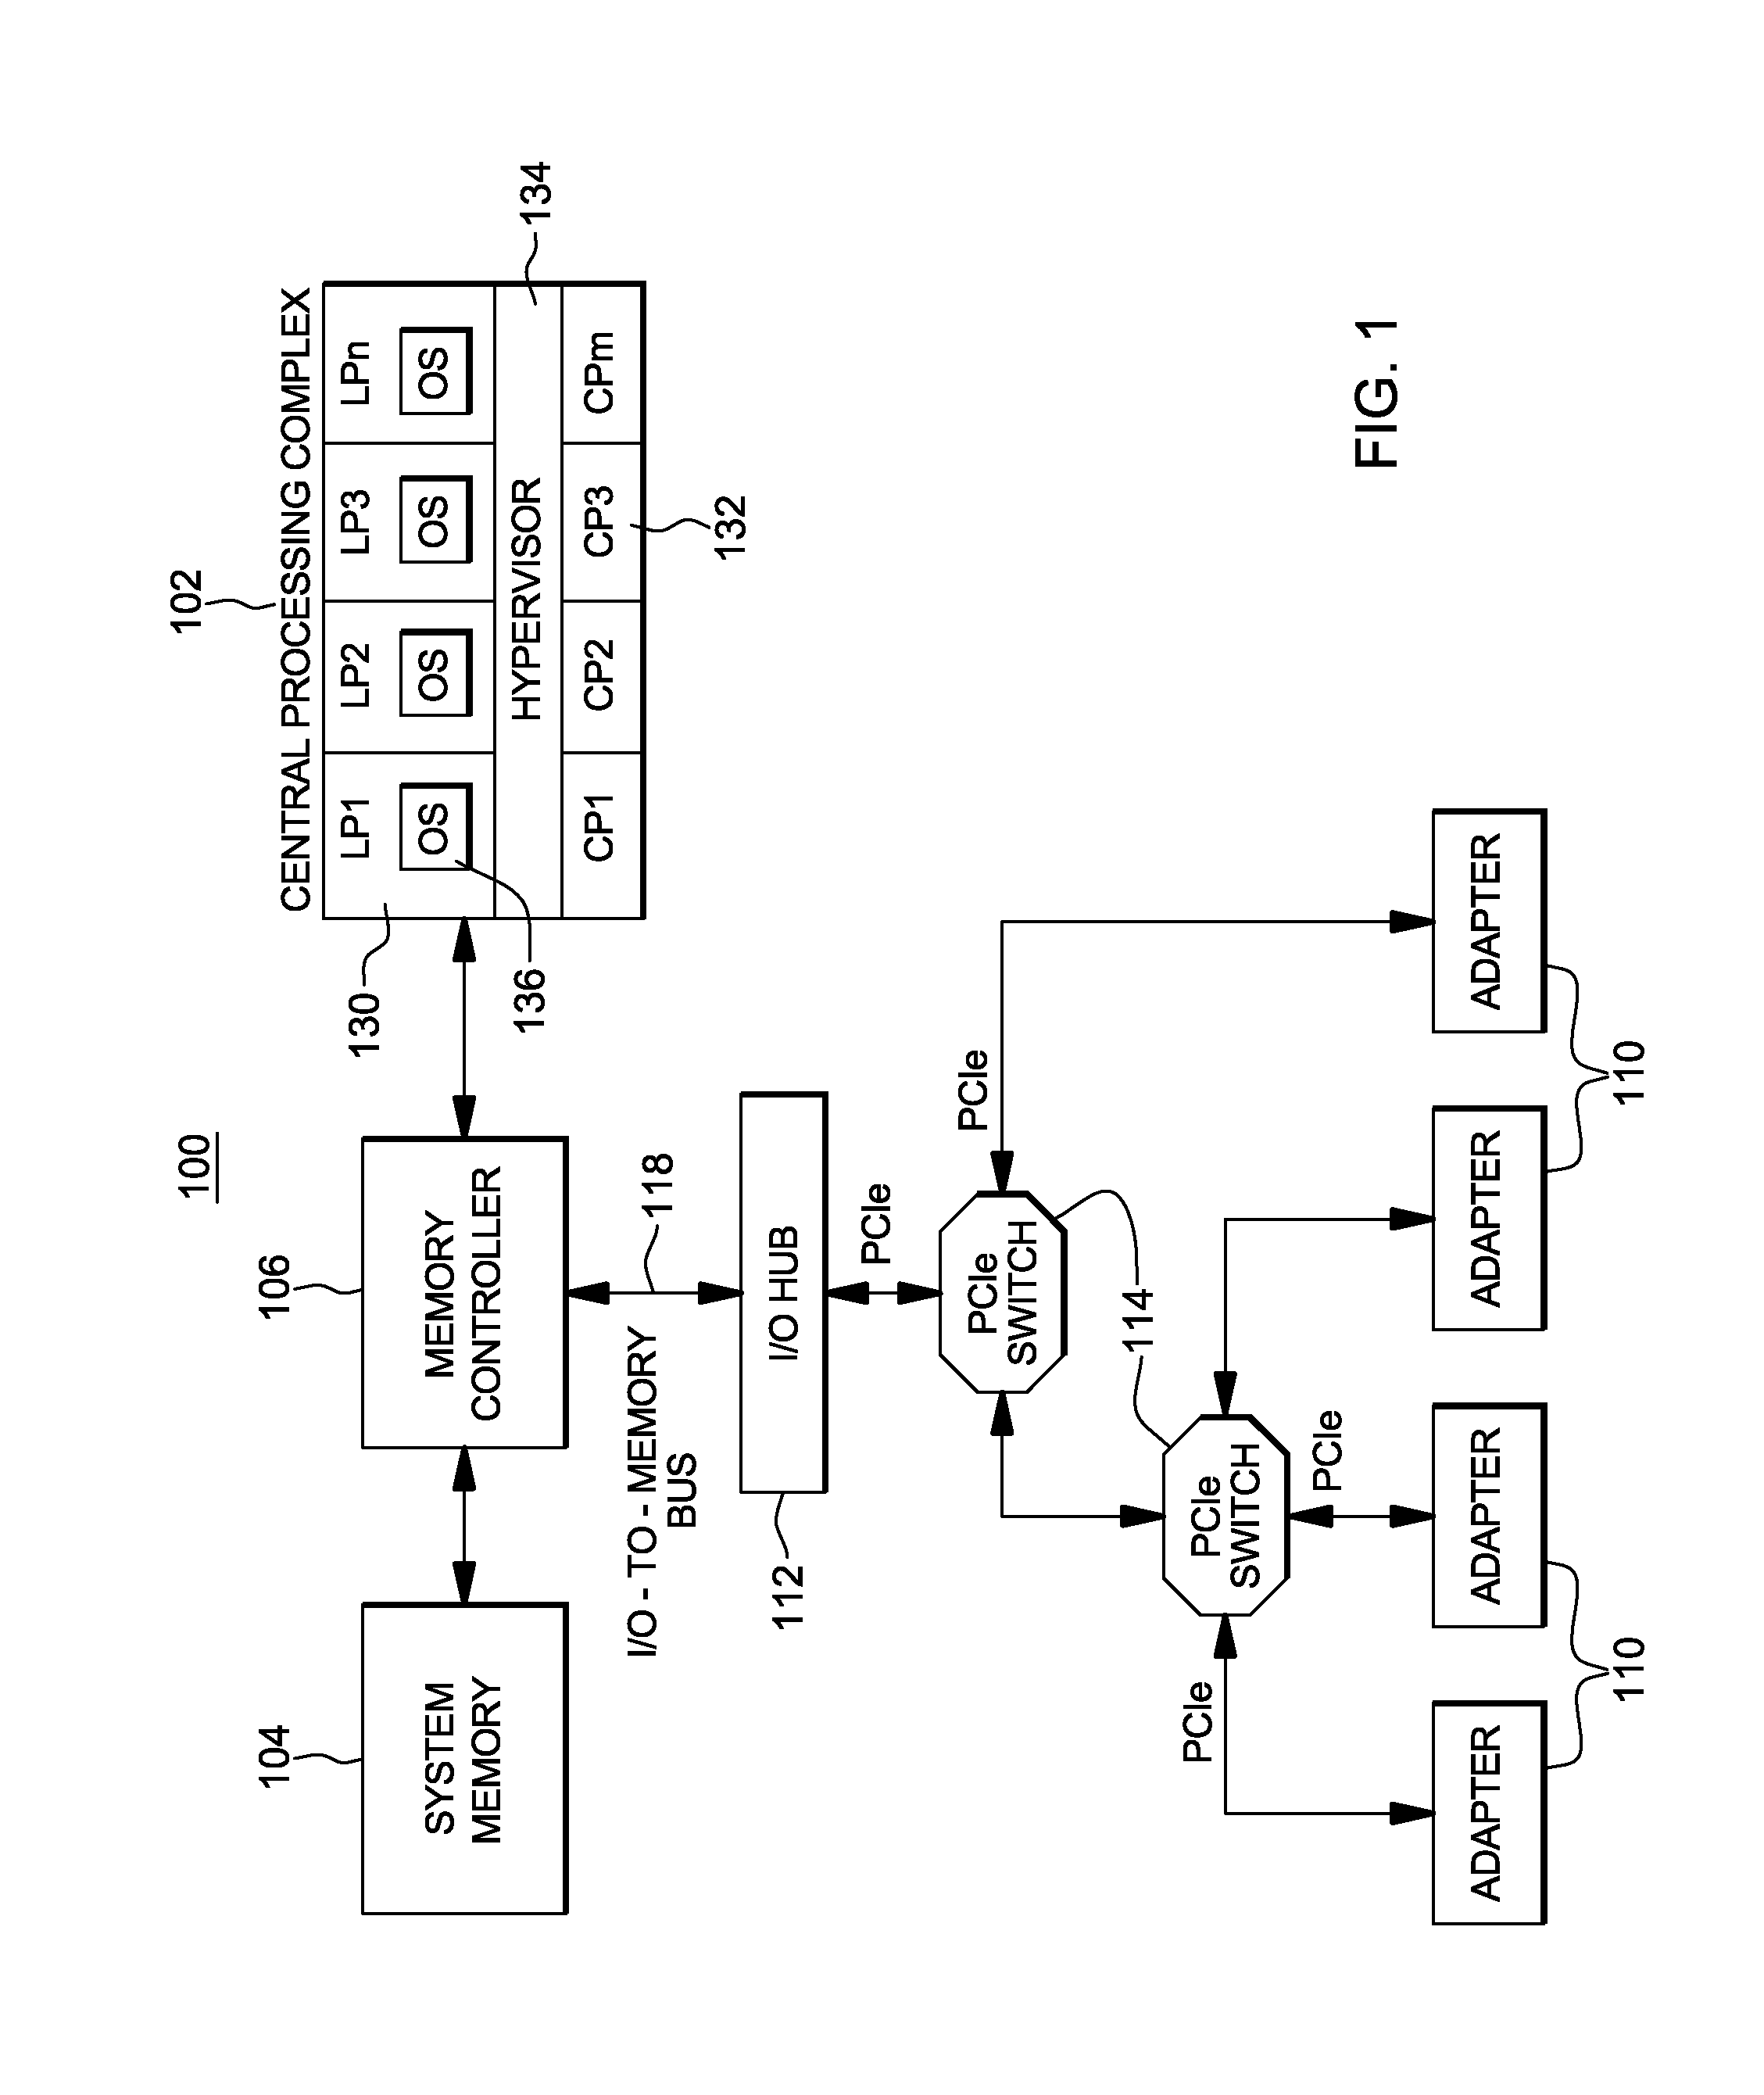 Managing processing associated with hardware events